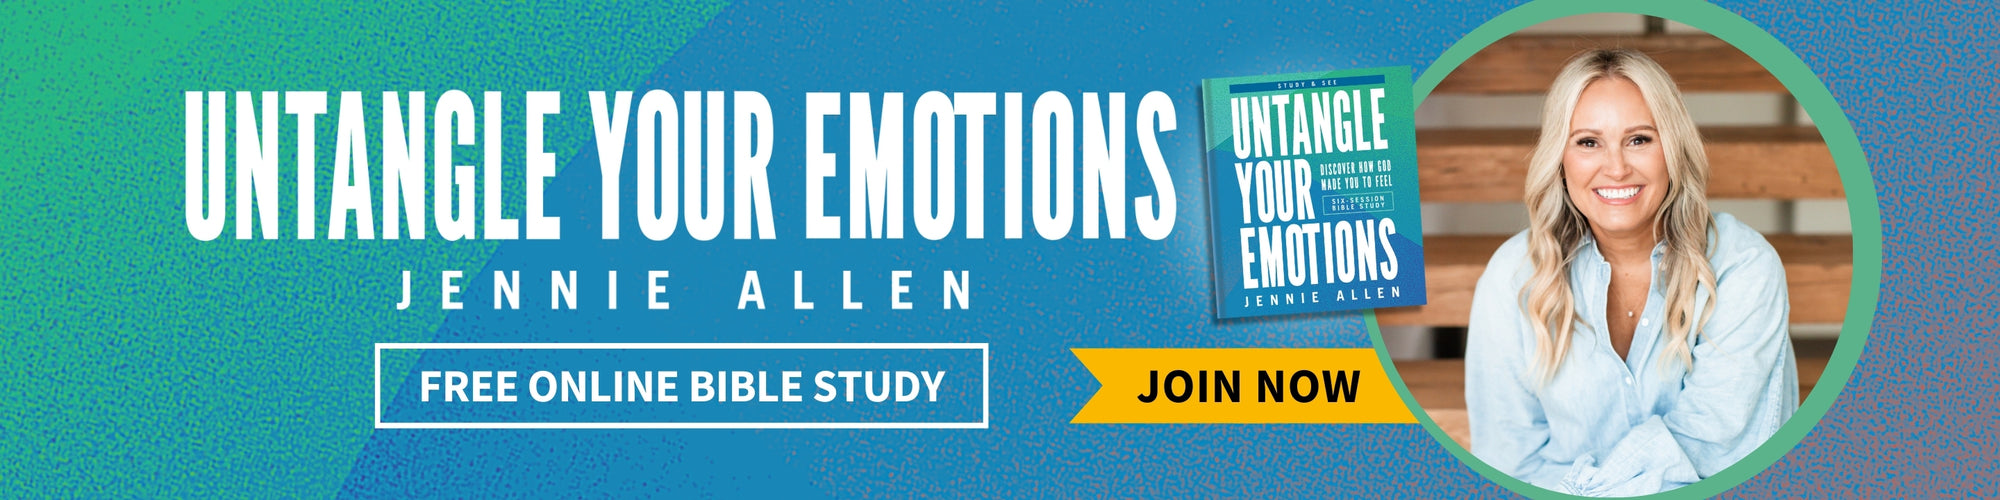 Untangle Your Emotions Free Online Bible Study by Jennie Allen